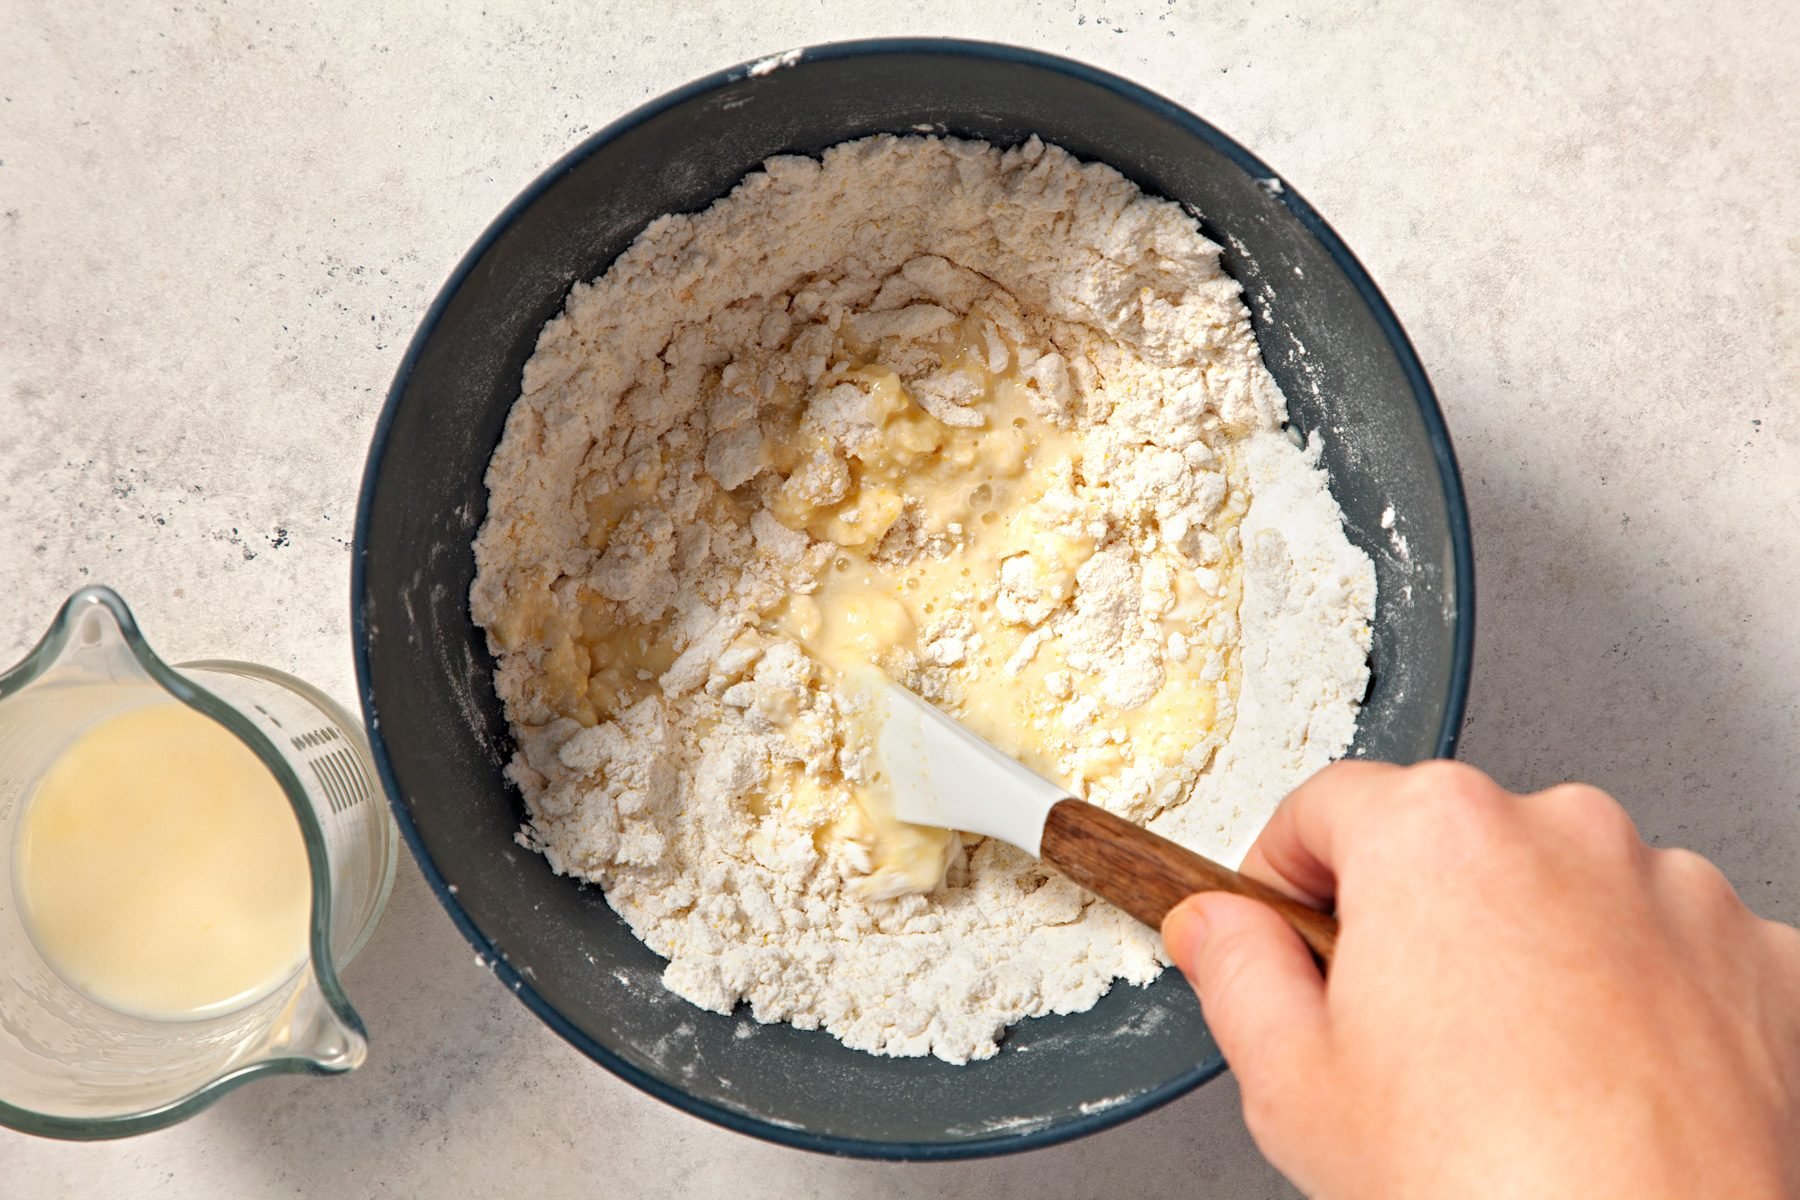 A hand is mixing flour with milk, egg, and other ingredients in a bowl